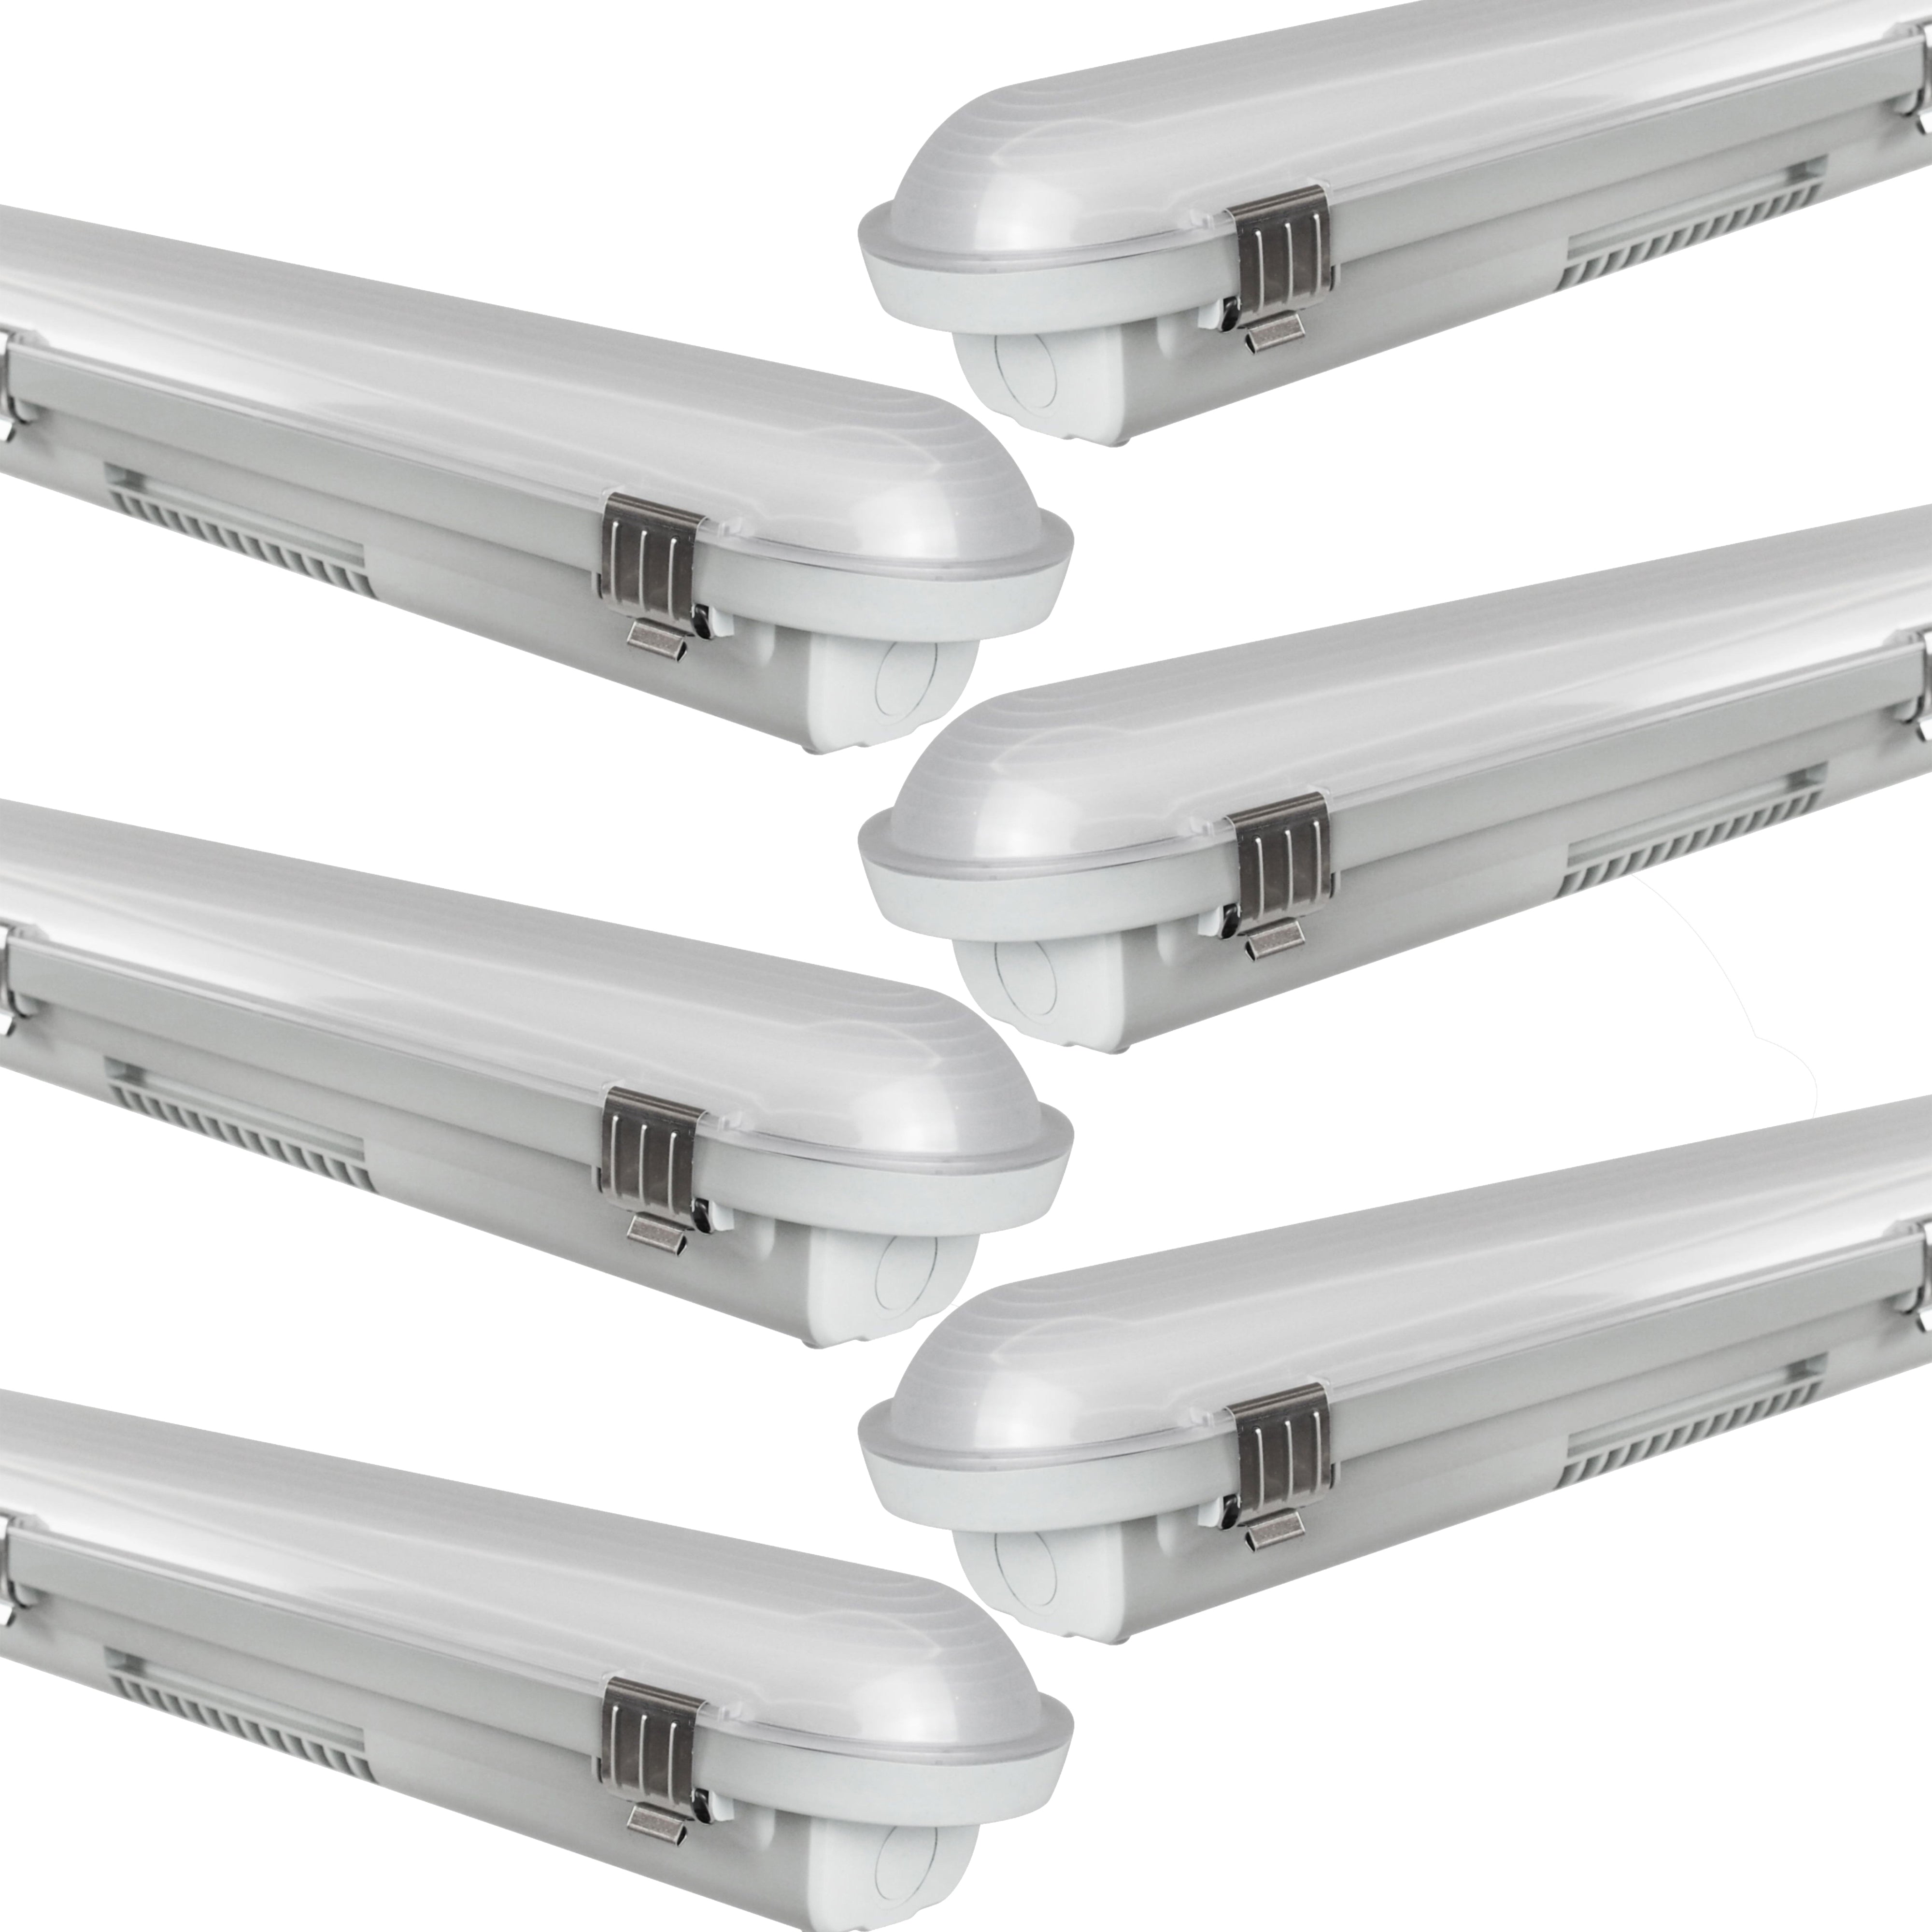 LED Non Corrosive IP65 Batten Fitting Light 150cms 50W 6000K, 6000 Lumens Ultra Bright, Up to 20000 Hours of Operation, Instant Start